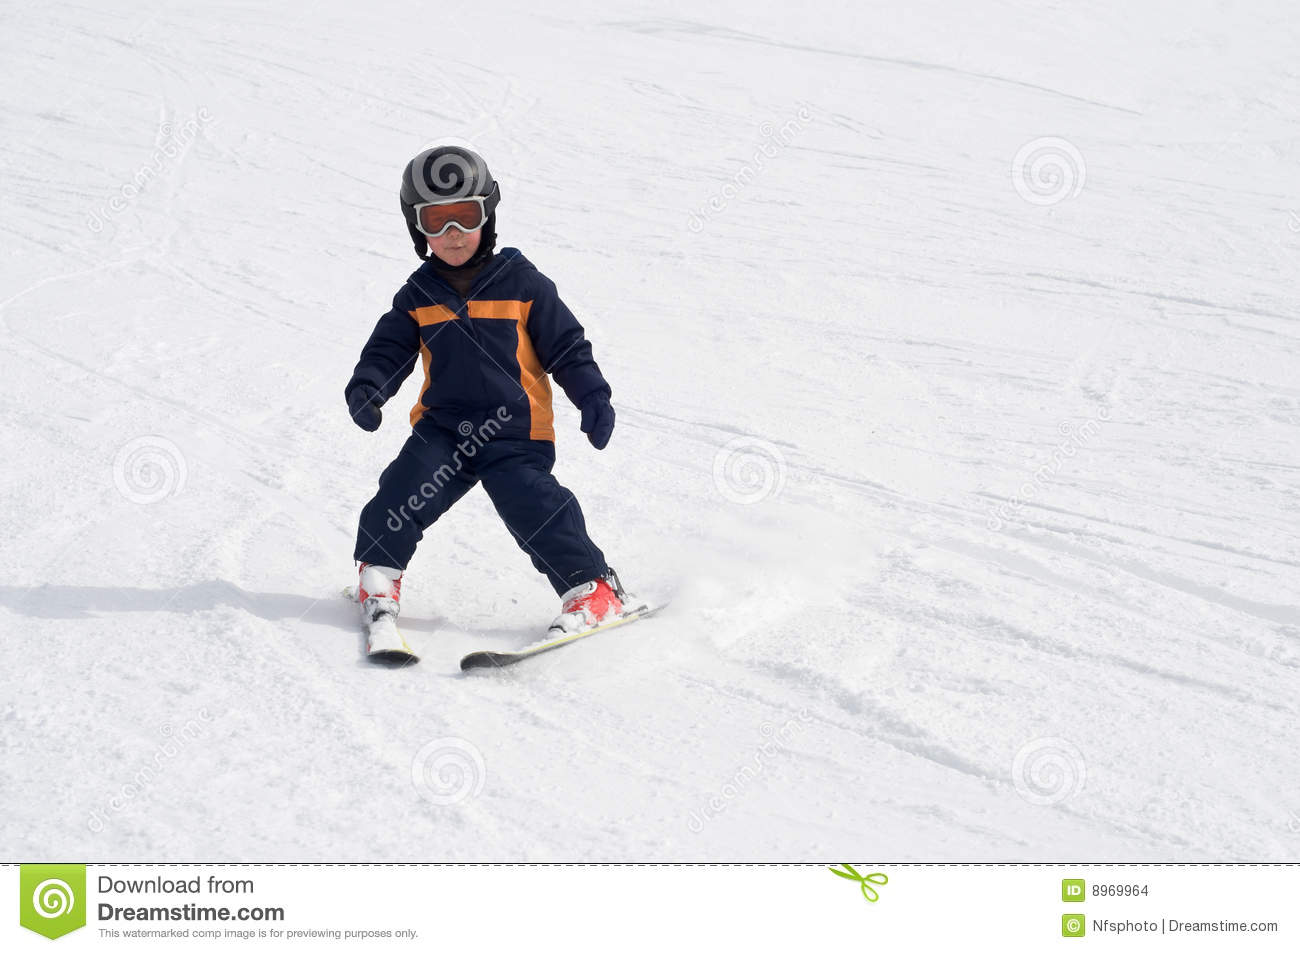 Four Year Old Child Learning To Ski Alone On The Snow Using Wedge To